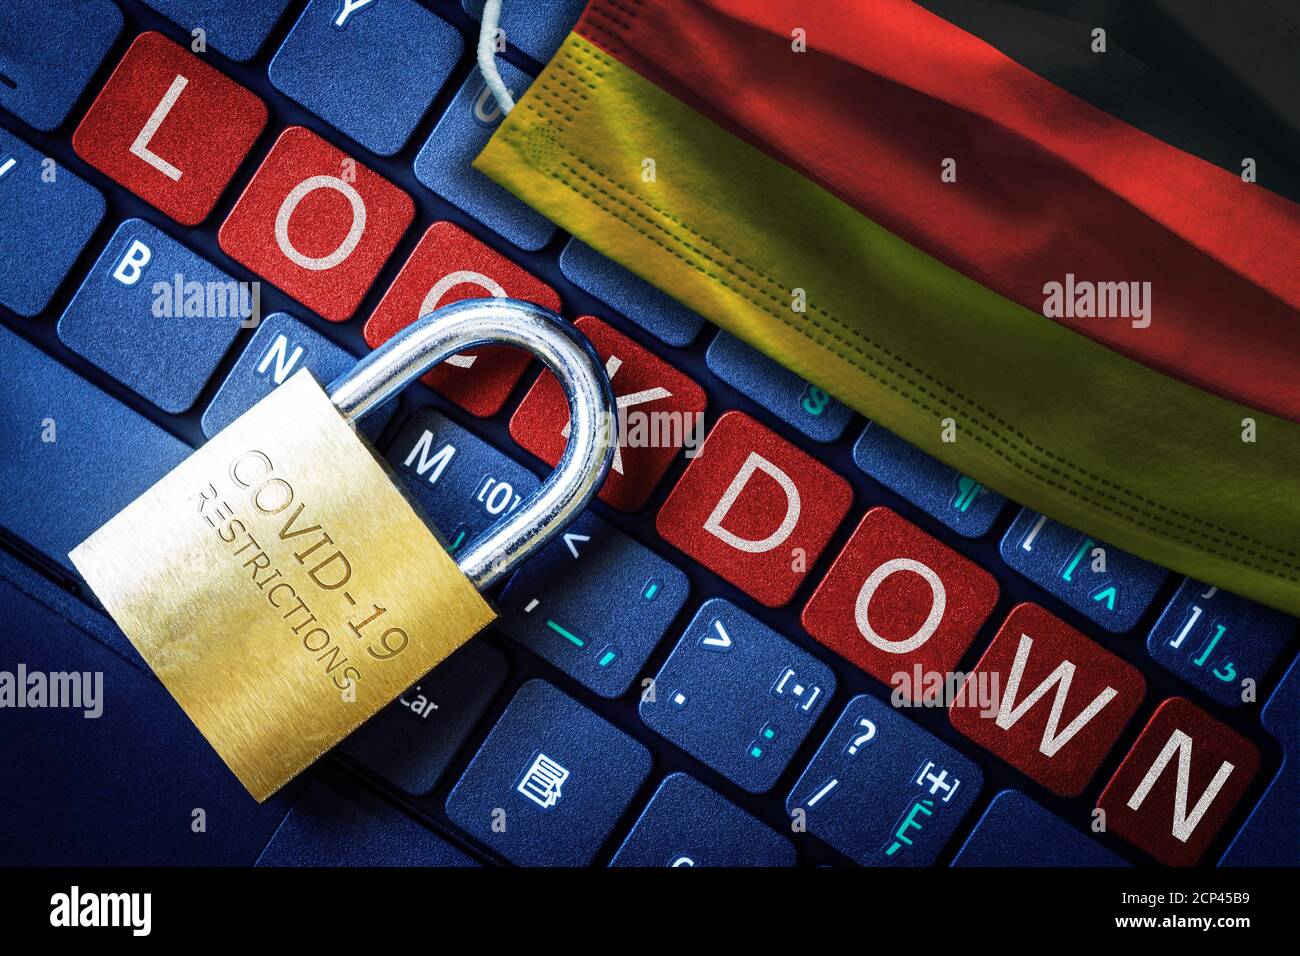 Germany COVID-19 coronavirus lockdown restrictions concept illustrated by padlock on laptop red alert keyboard buttons and face mask with German flag. Stock Photo